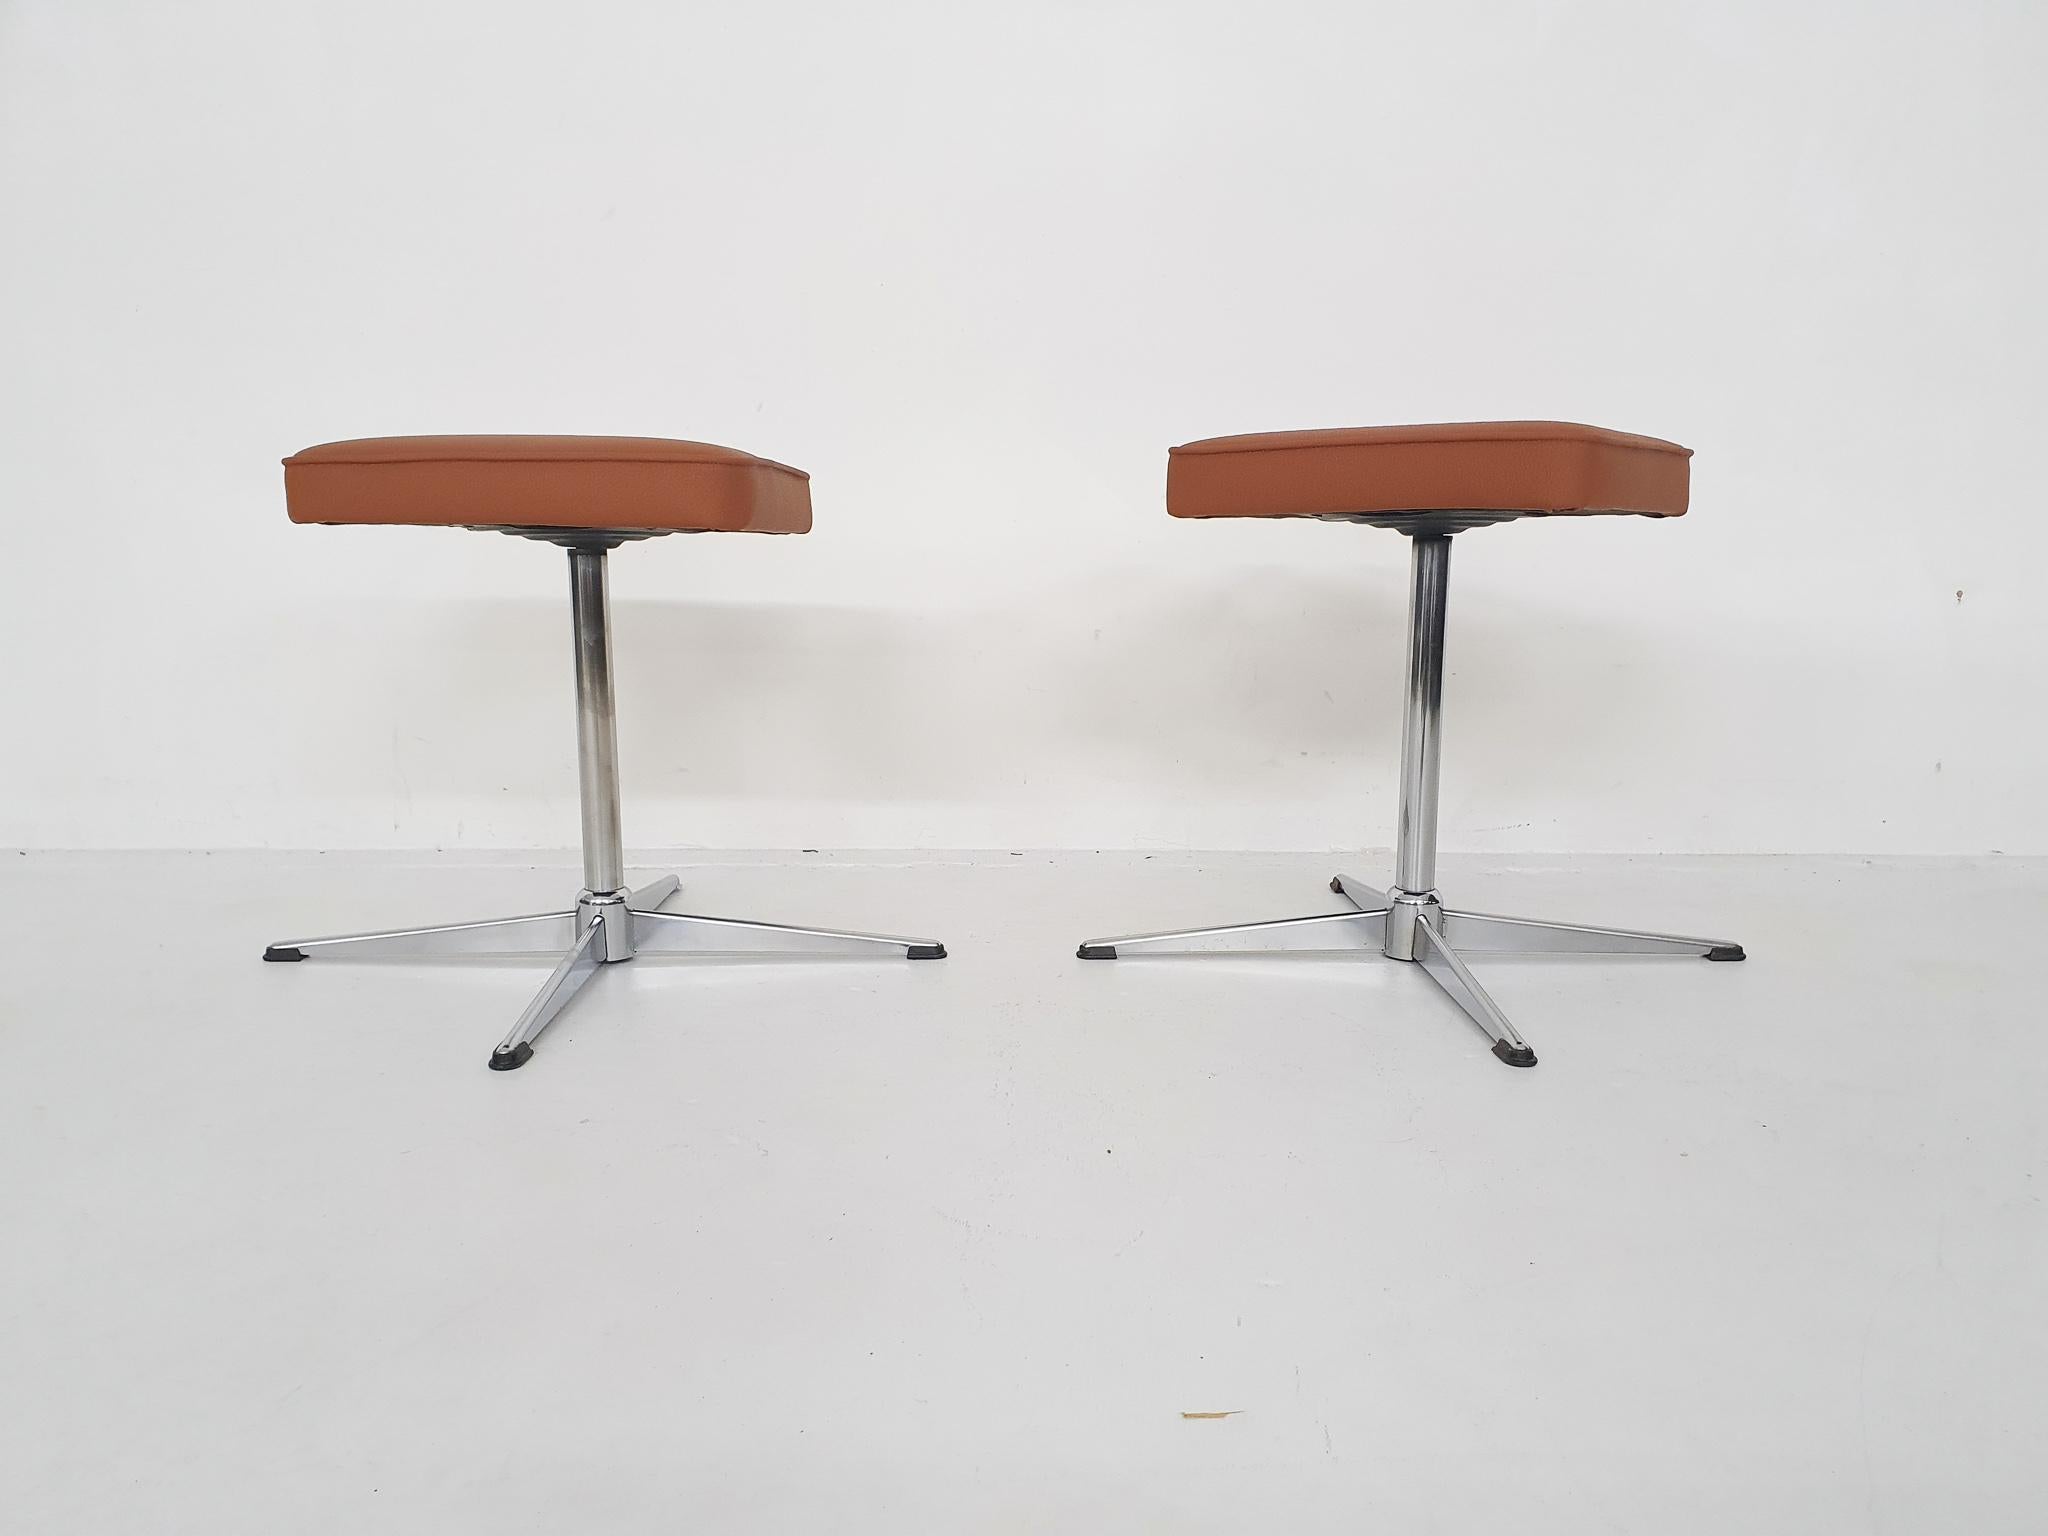 Set of Two Mid-Century Swivel Stools, Attrb. Brabantia, the Netherlands In Good Condition For Sale In Amsterdam, NL